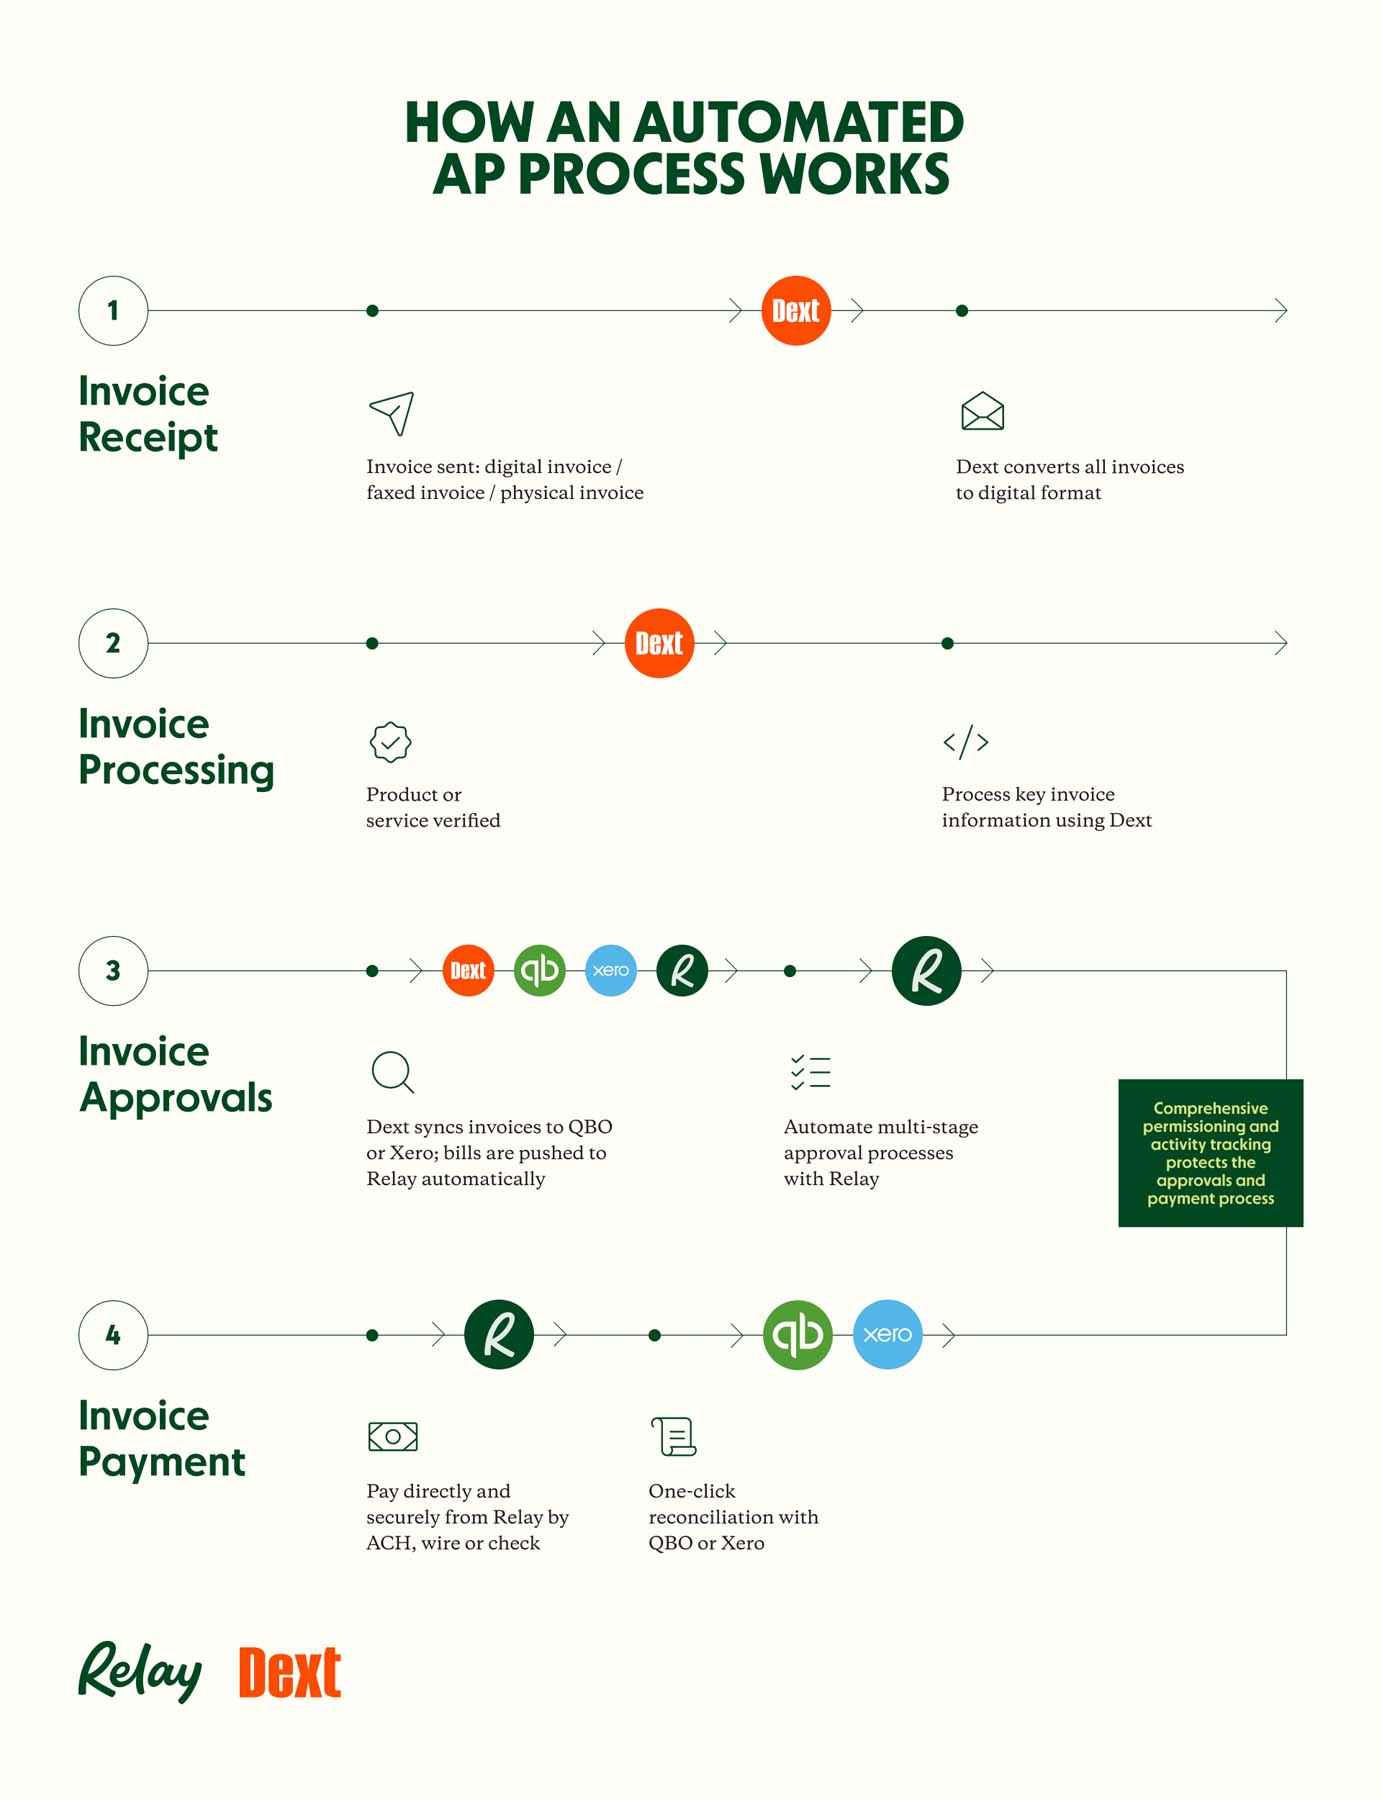 Automated Accounts Payable (AP) Process Example -Workflow for Invoice Receipt, Processing, Approvals, and, Payment using Relay and Dext